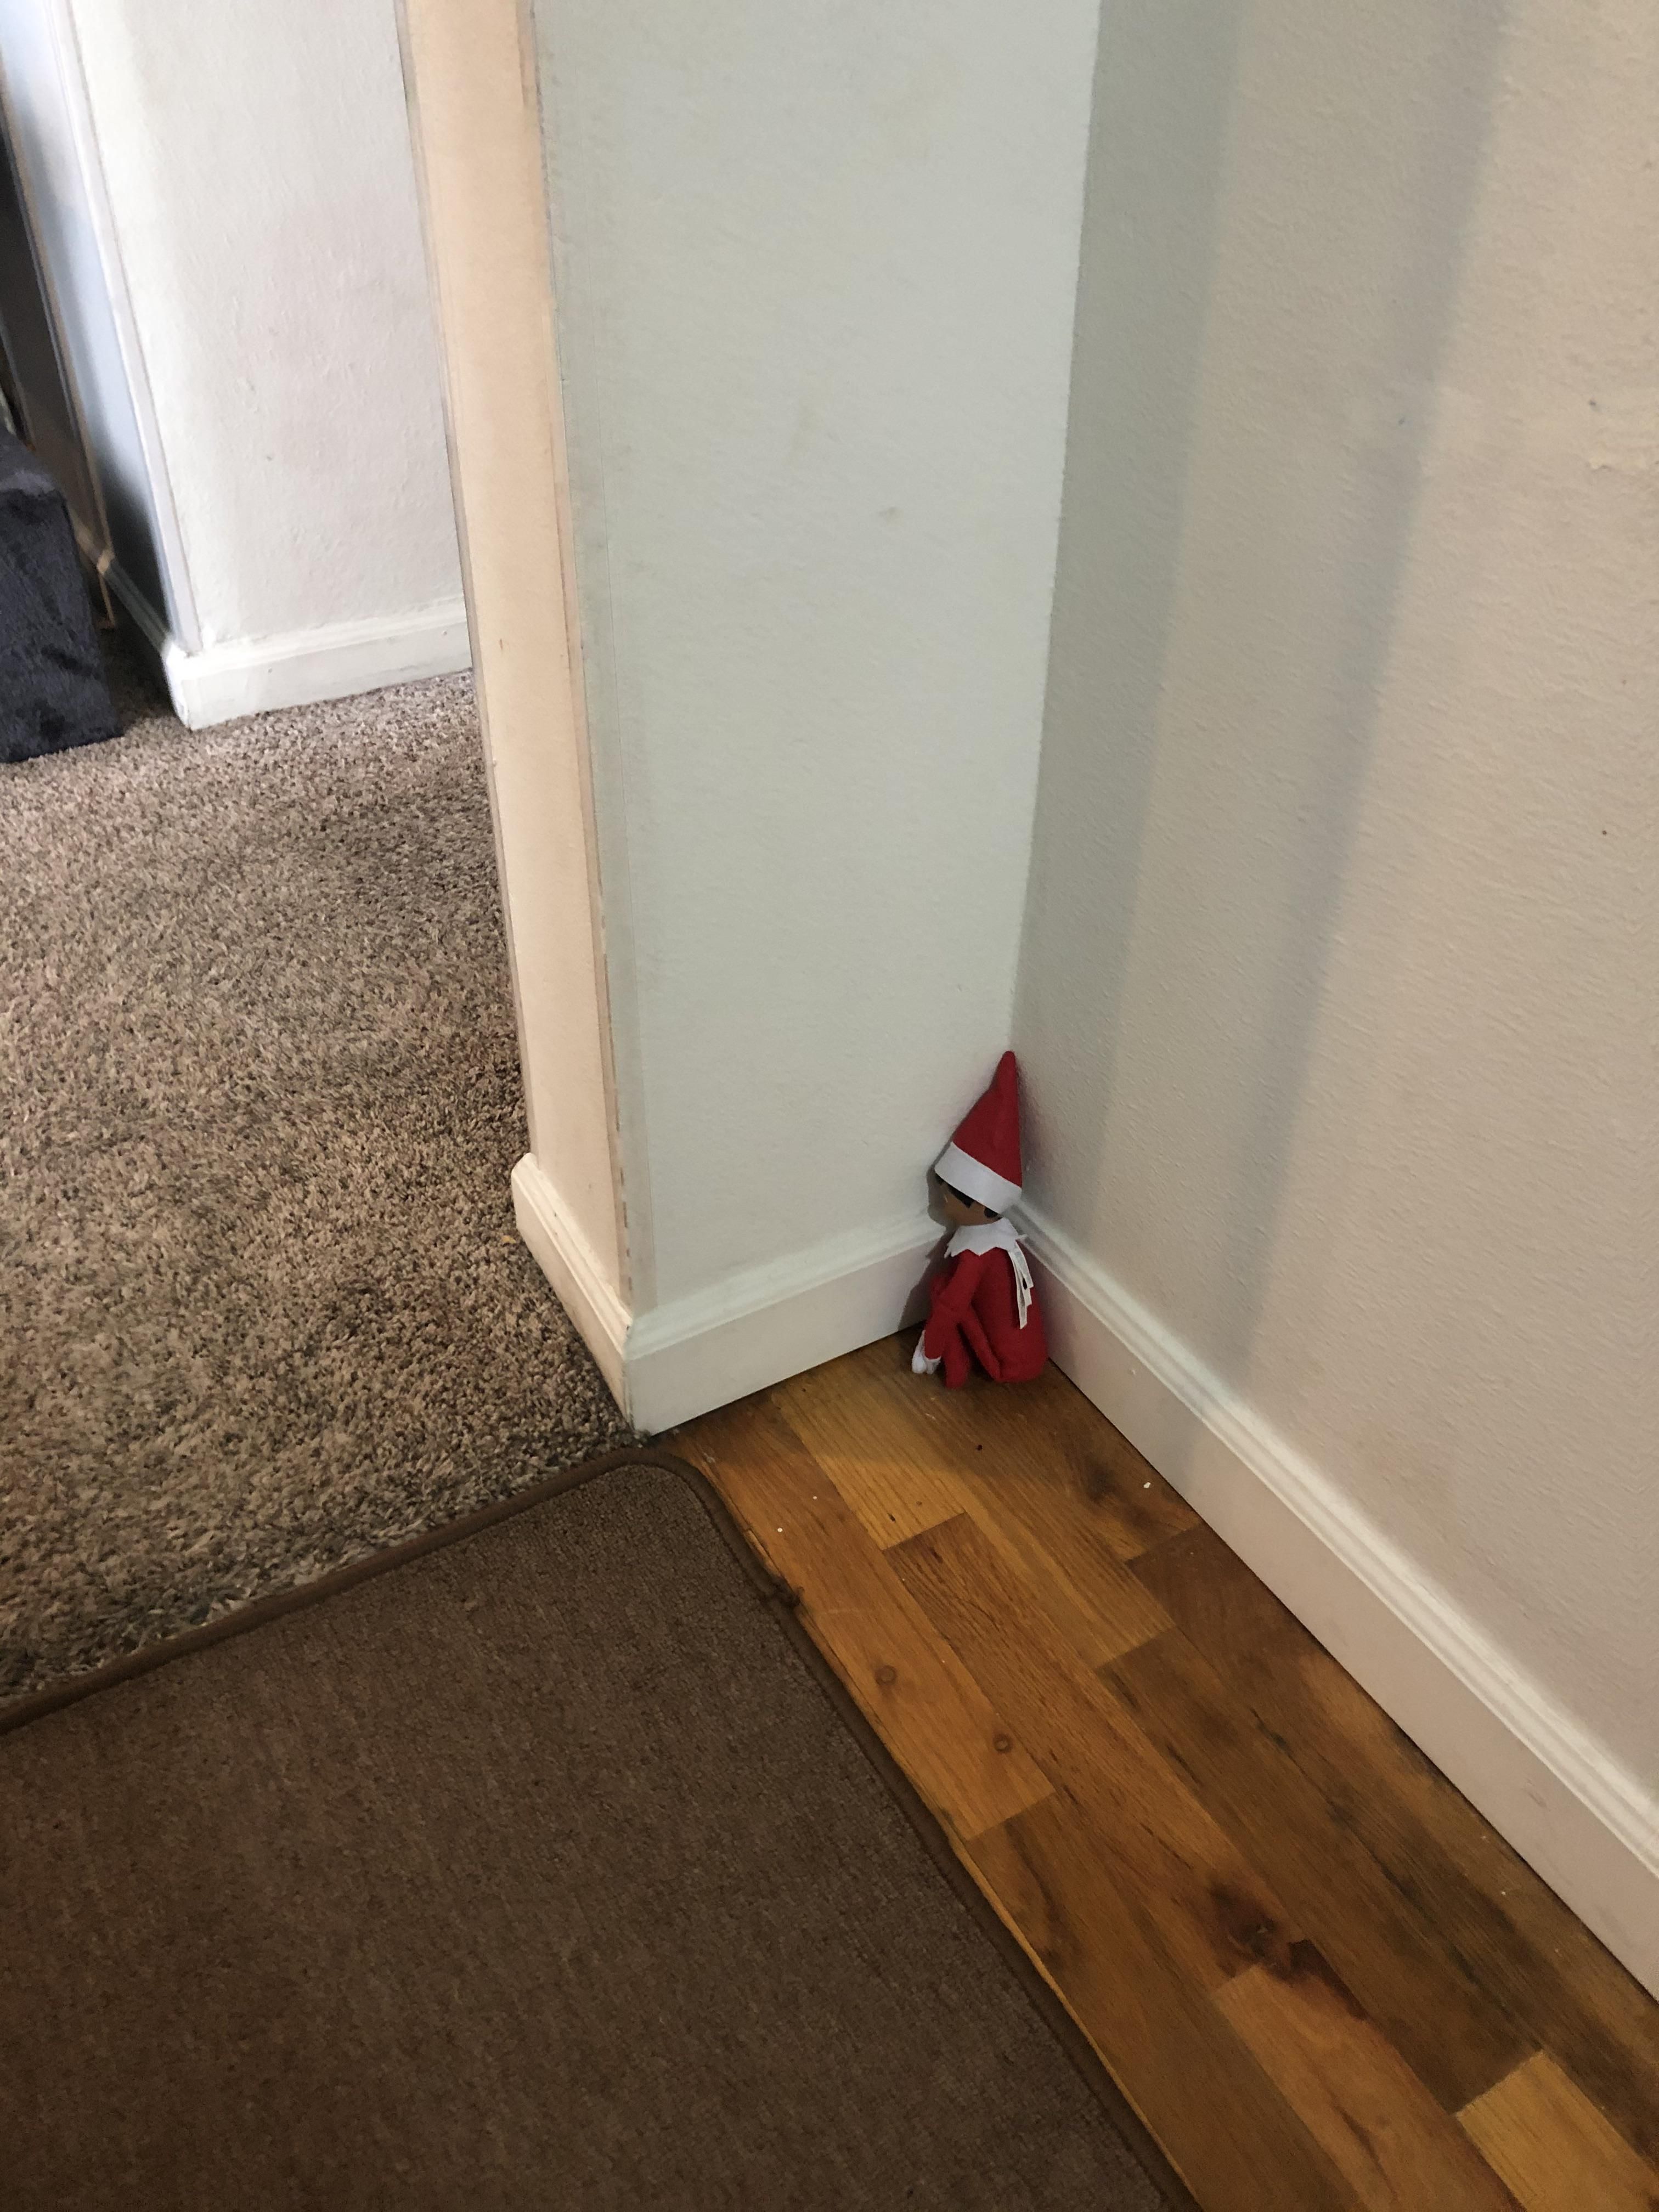 My four year old moved the Elf from the shelf to a corner where he can’t see anything to report to Santa..